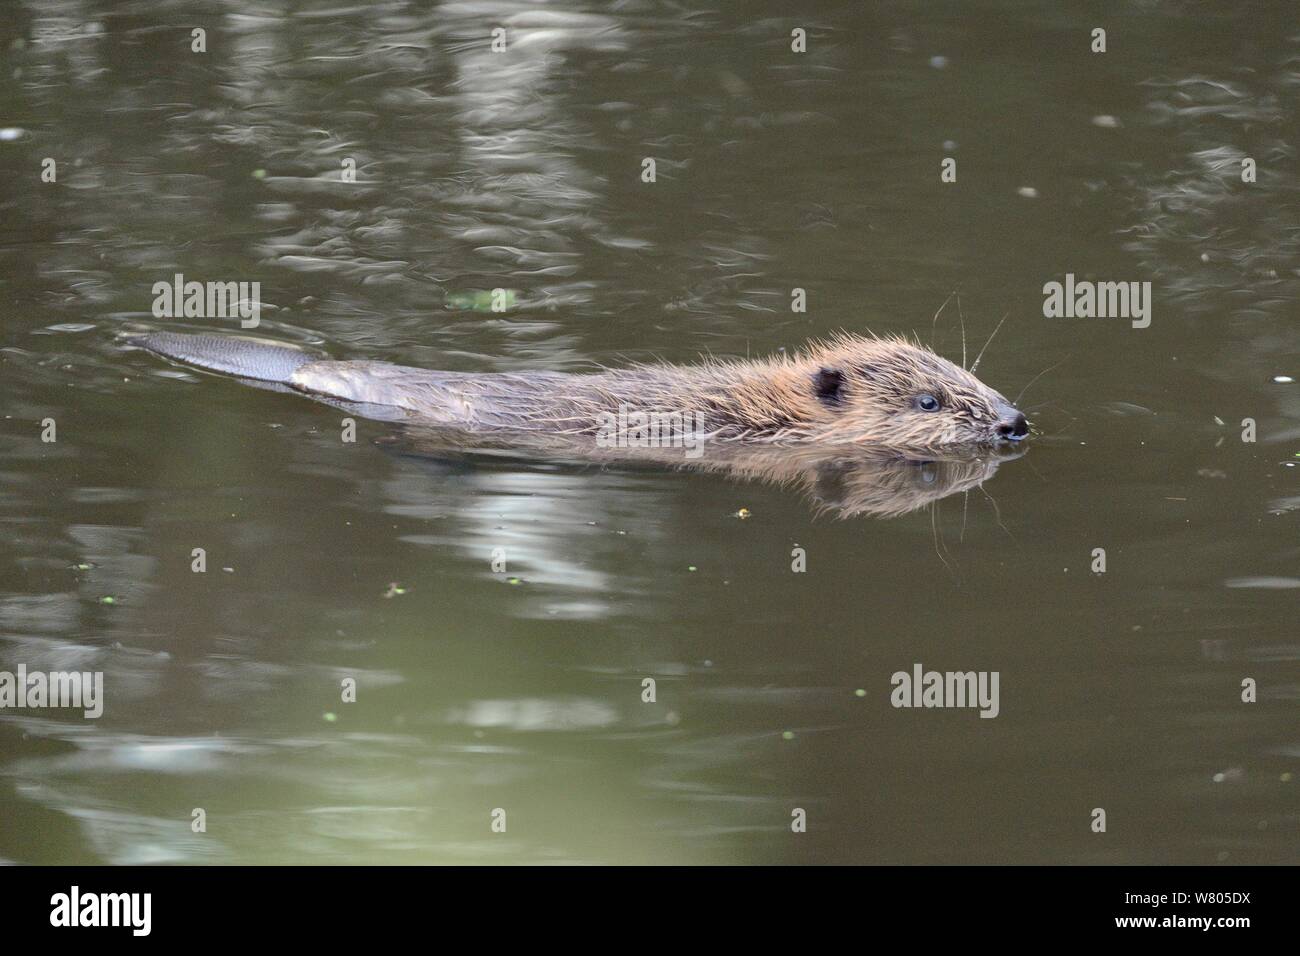 Young Eurasian beaver (Castor fiber) kit swimming at dusk, born in the wild on the River Otter, part of a release project managed by the Devon Wildlife Trust, Devon, England, UK, August 2015. Stock Photo